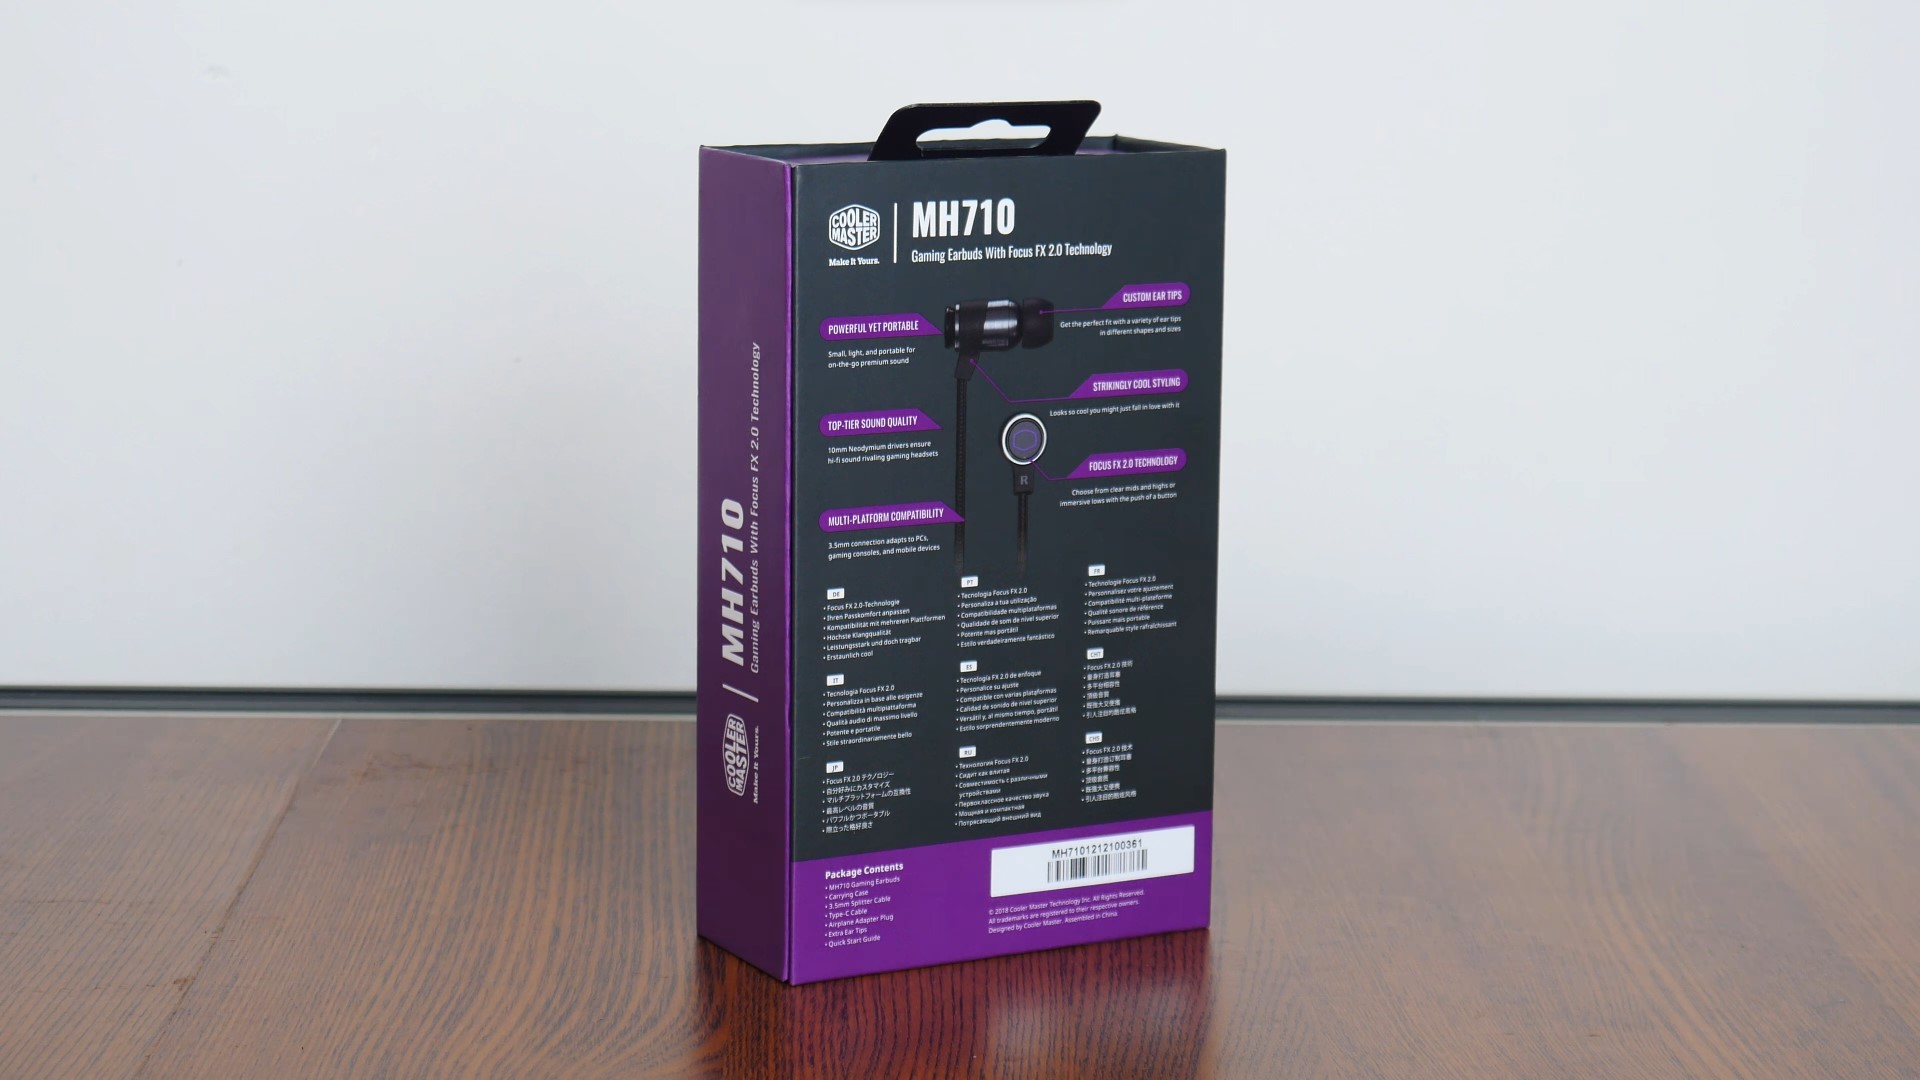 Cooler Master MH710 Packaging (Rear)